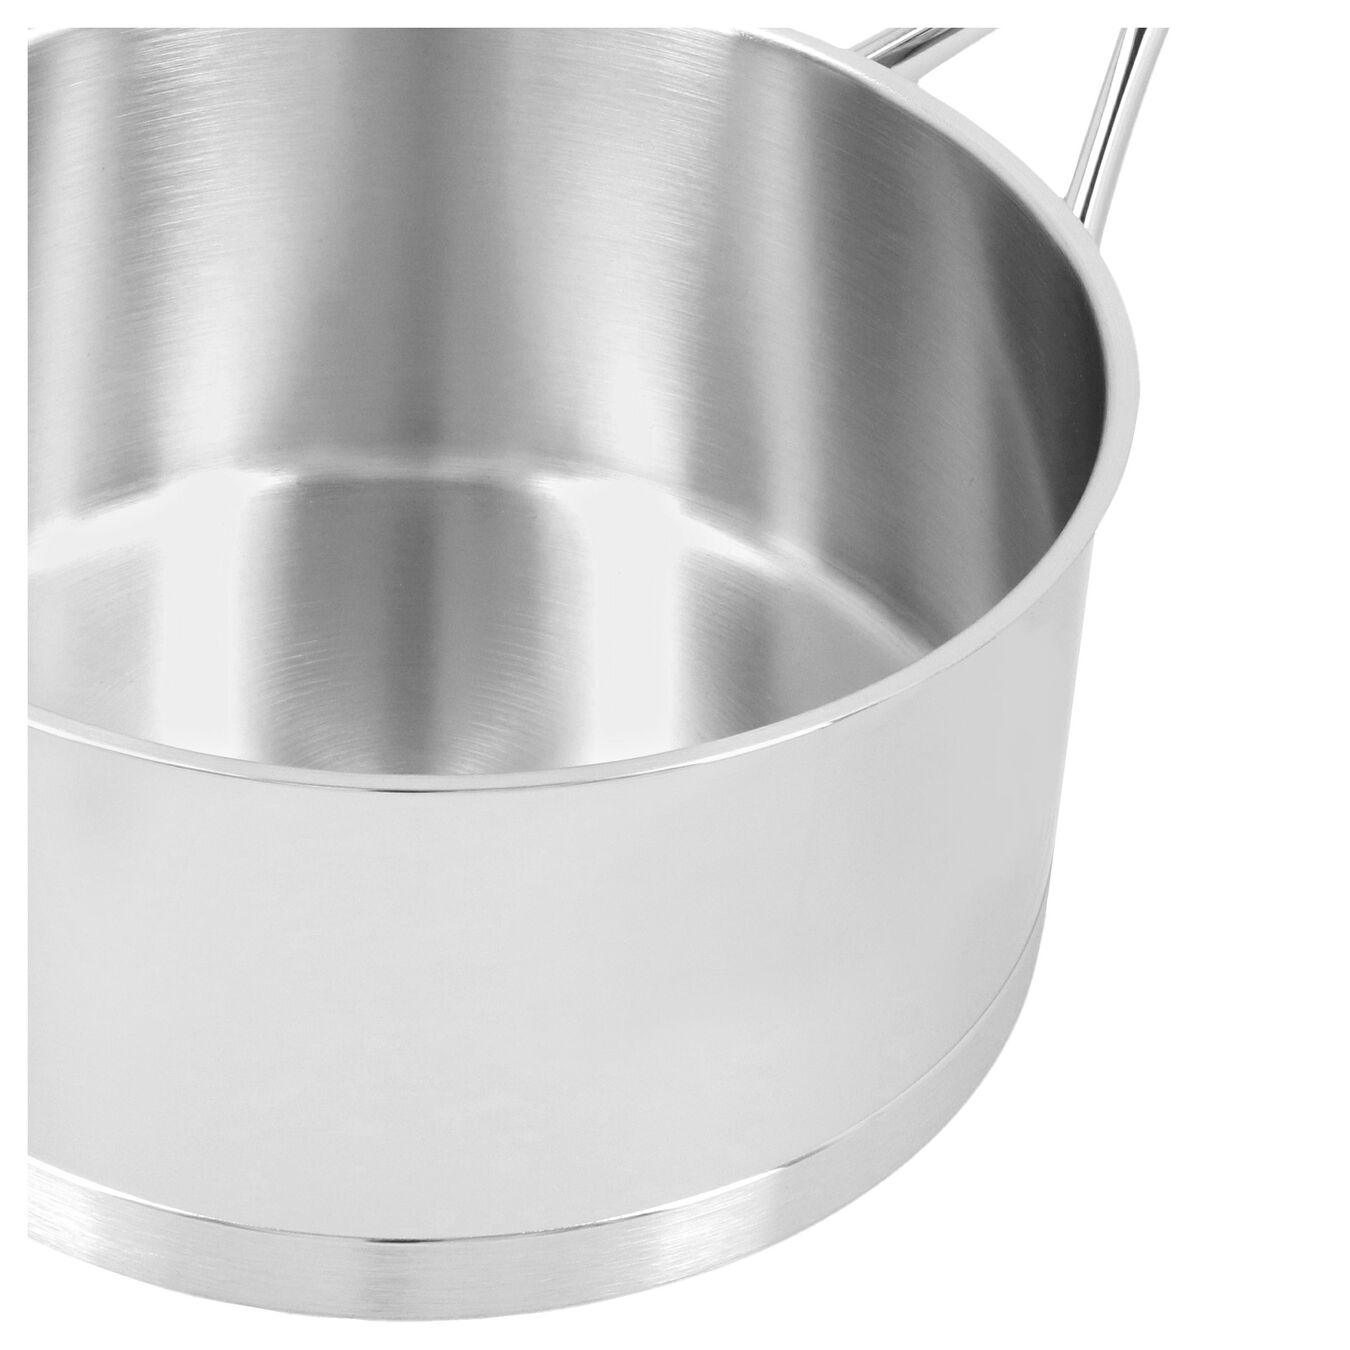 Demeyere Atlantis 7 Collection 3L 18/10 Stainless Steel Round Sauce Pan with Lid Inside 